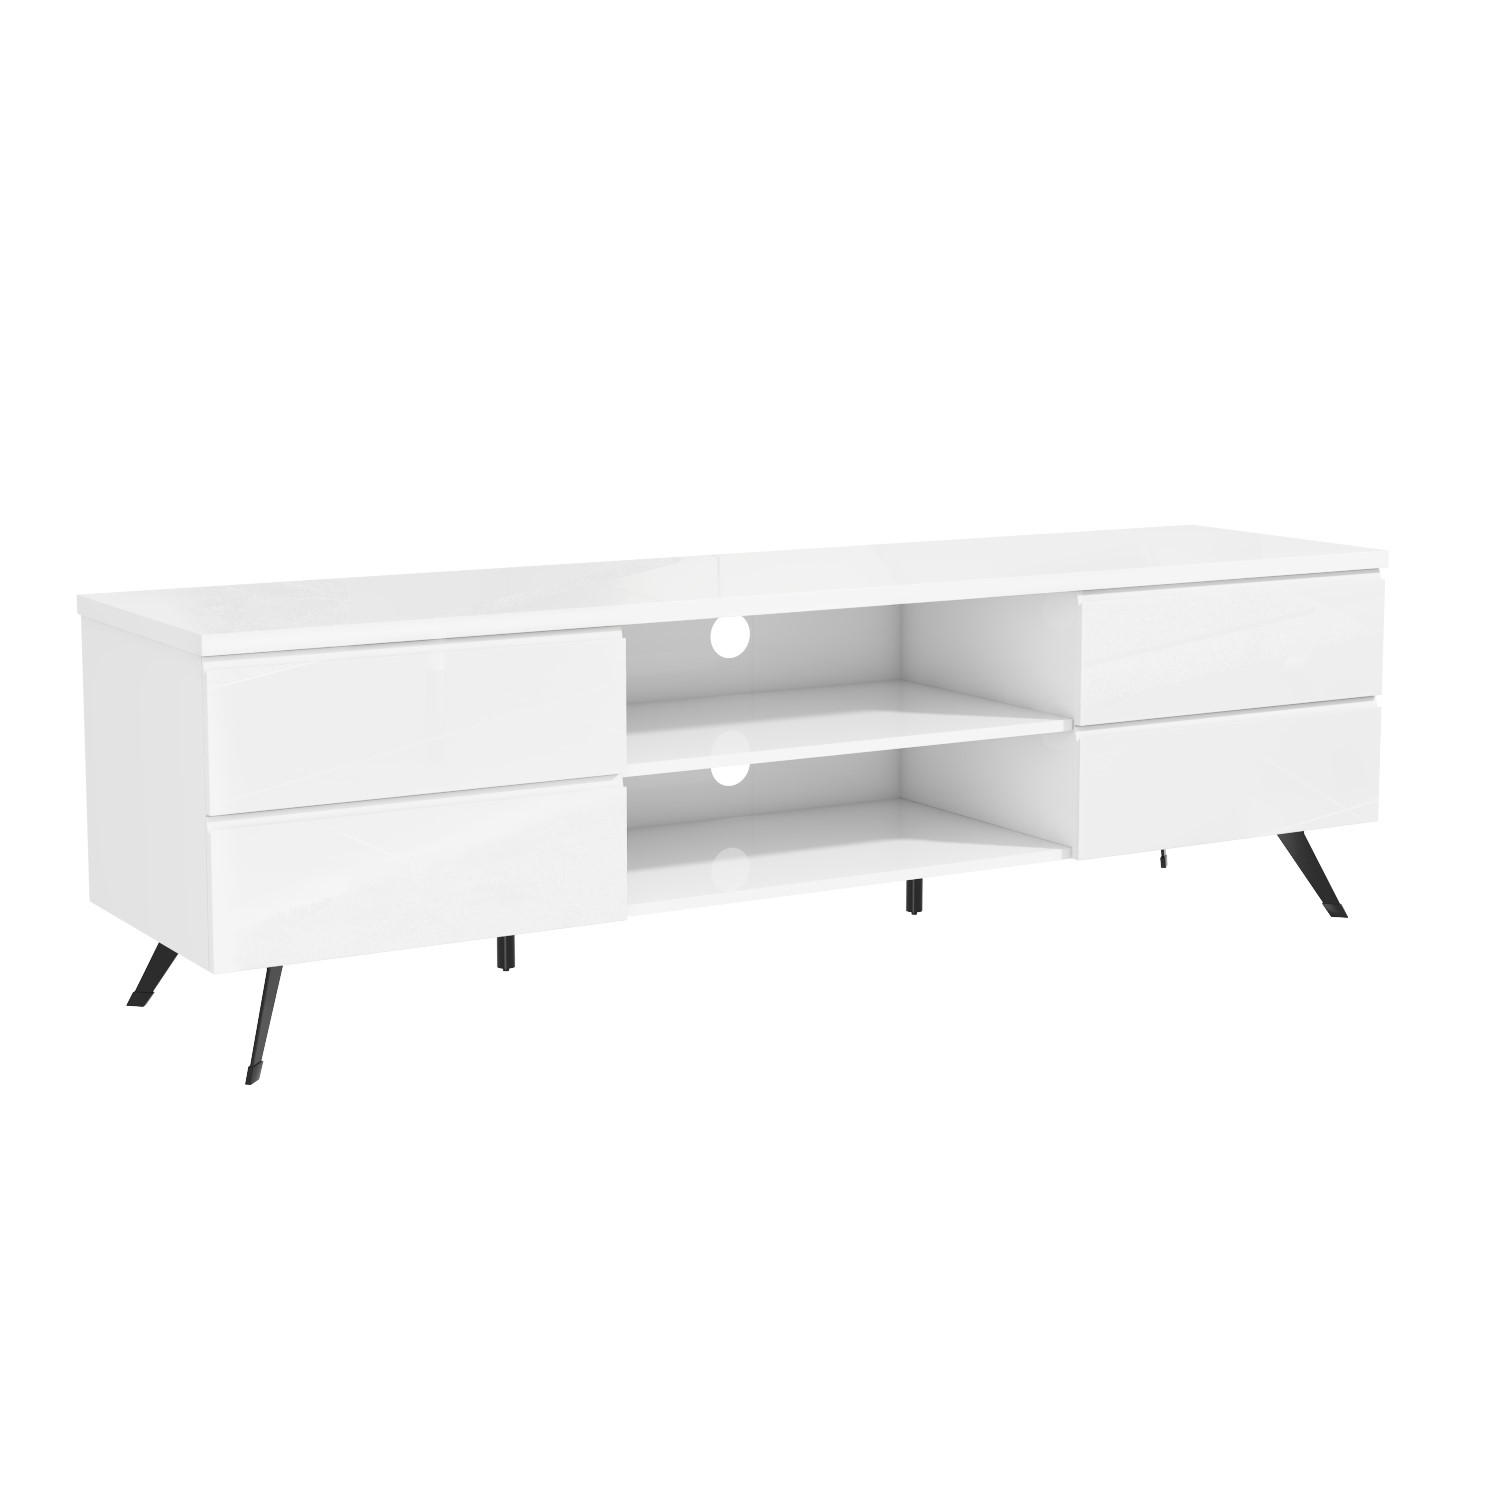 Photo of Wide white gloss tv stand with storage - tvs up to 77 - rochelle